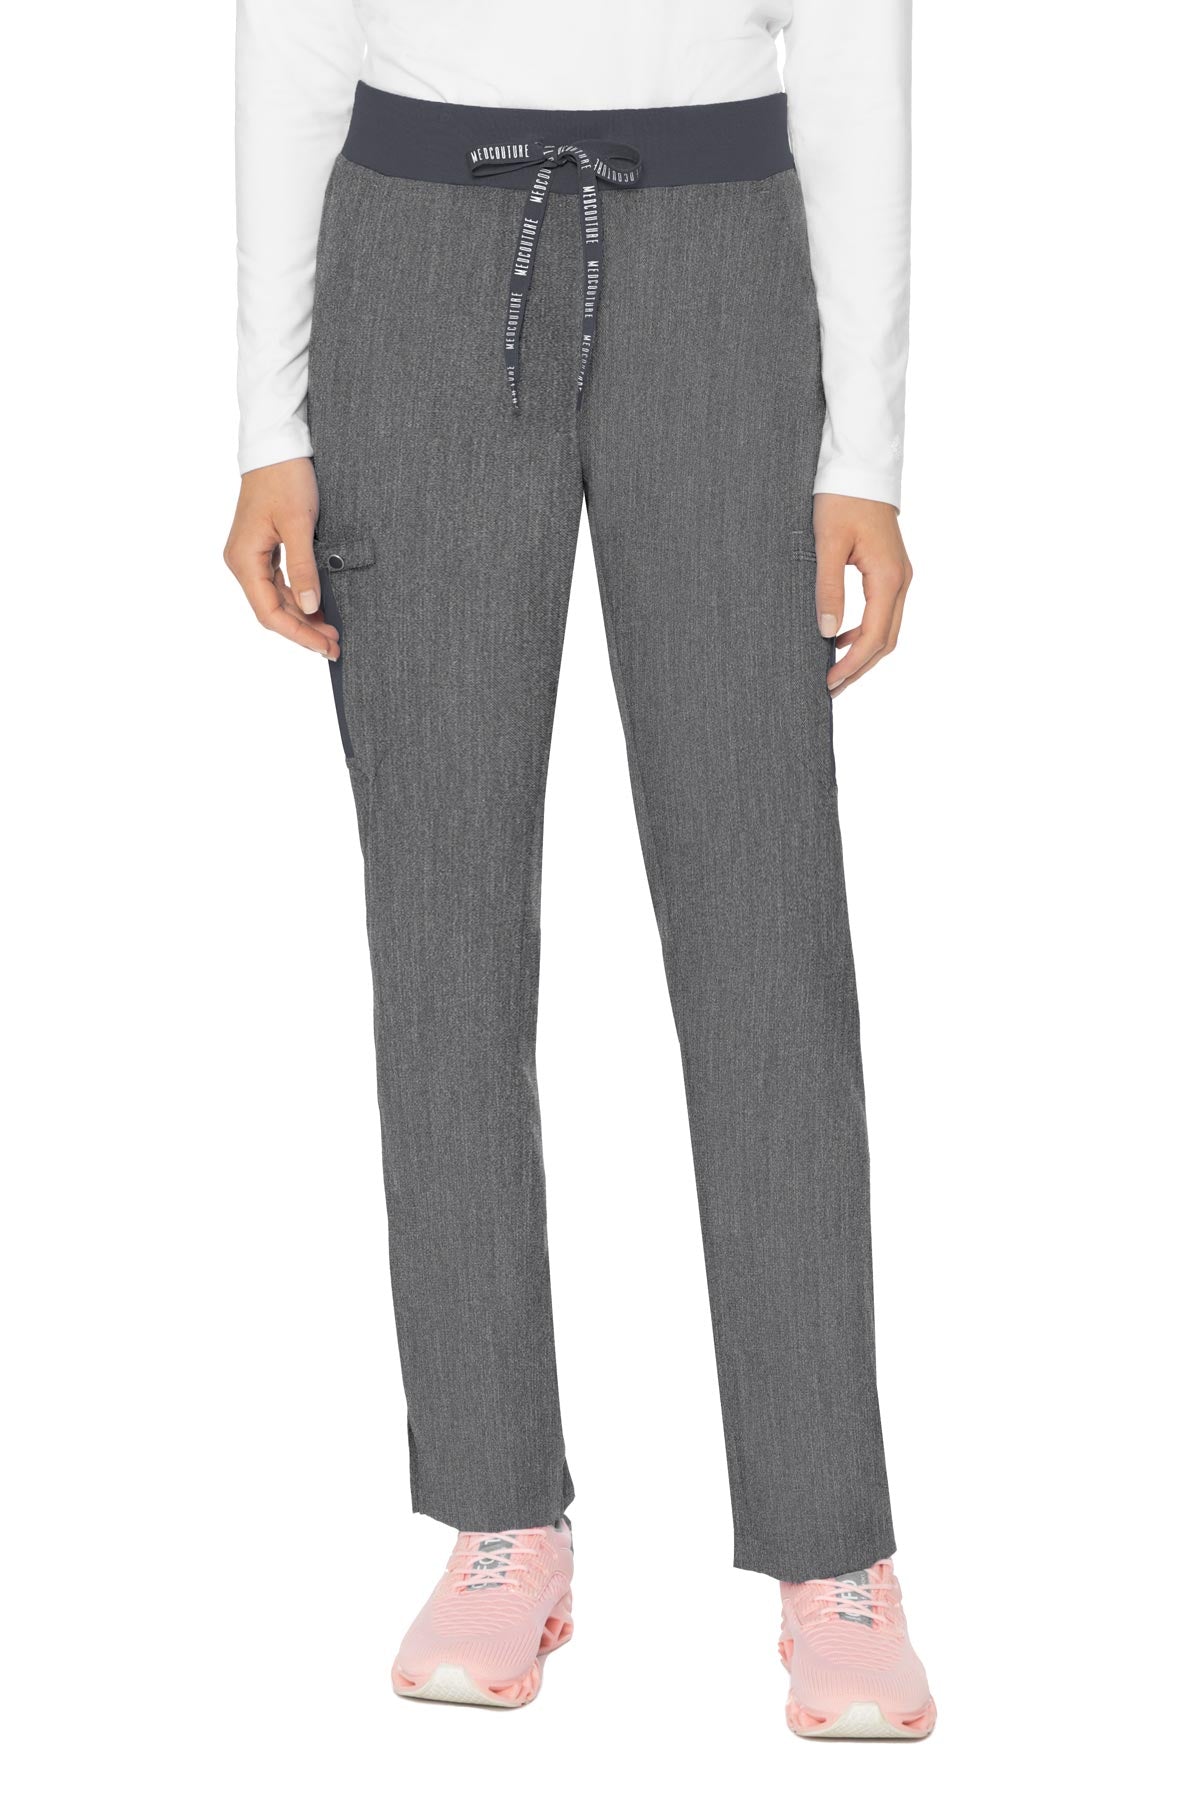 Med Couture Slate PANT